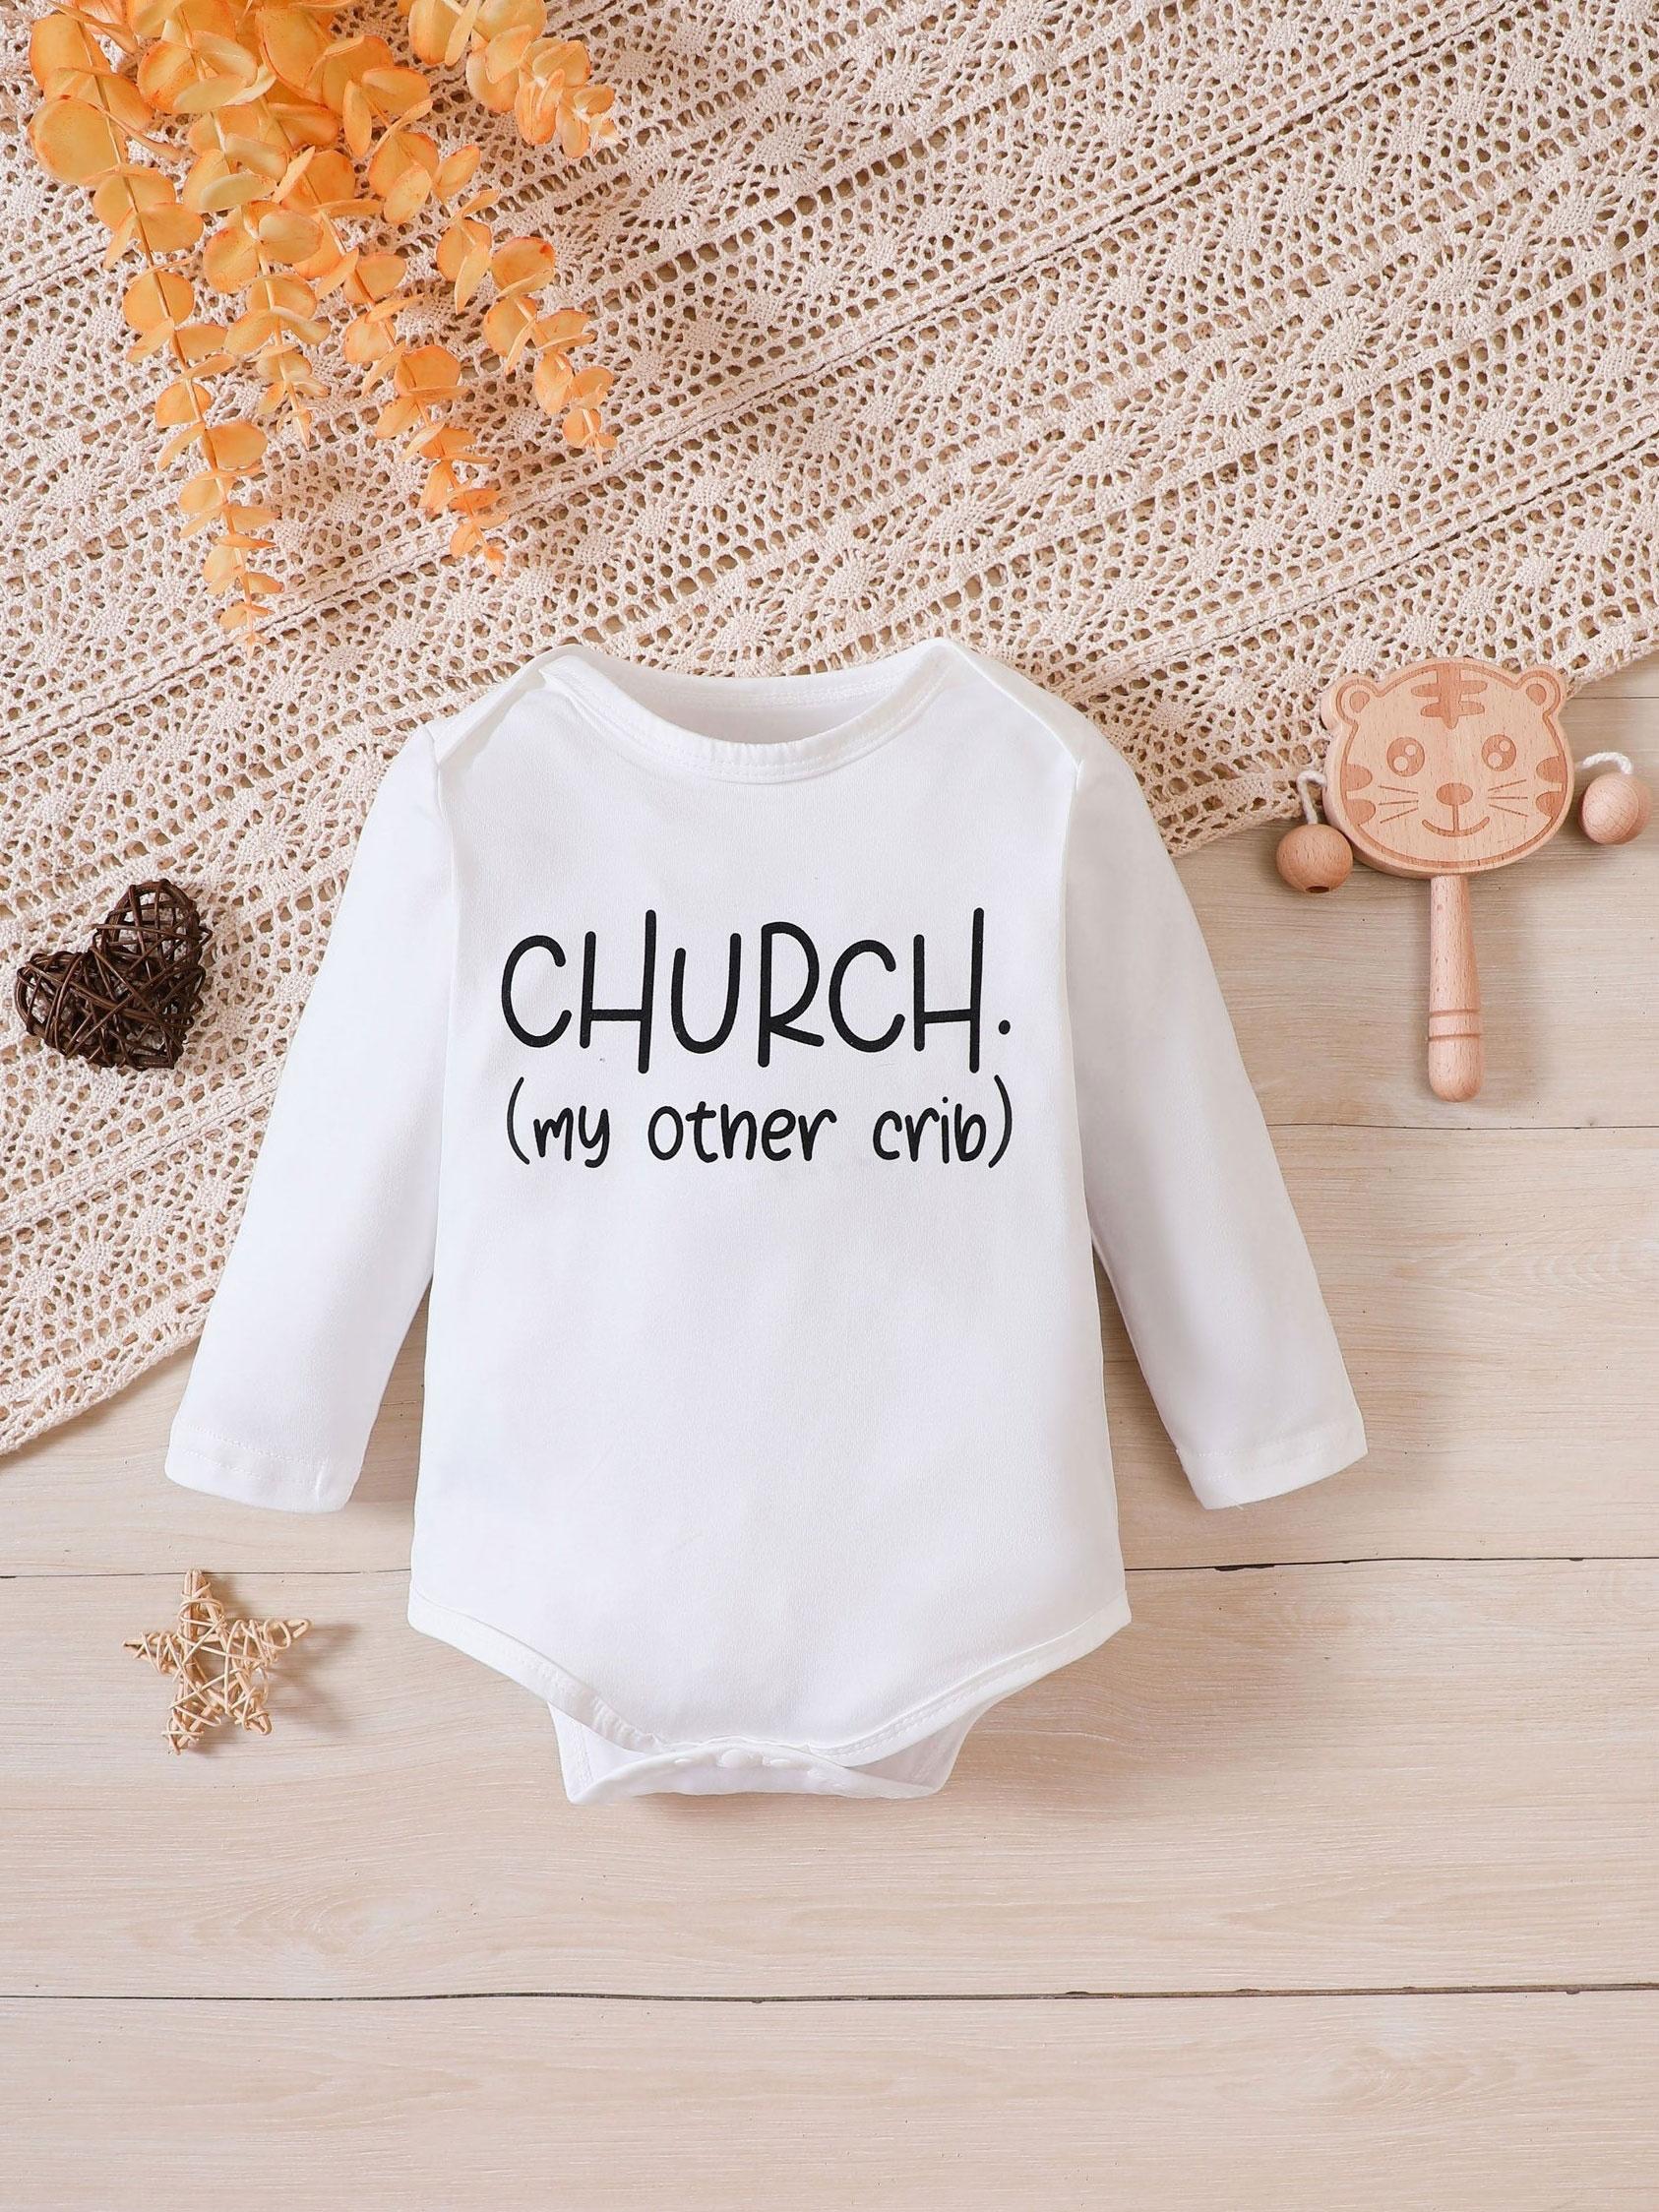 Beliangwings Baby Girl's Casual Onesie, CHURCH MY OTHER CRIB Print Bodysuit, Infant's Clothes For Spring Fall